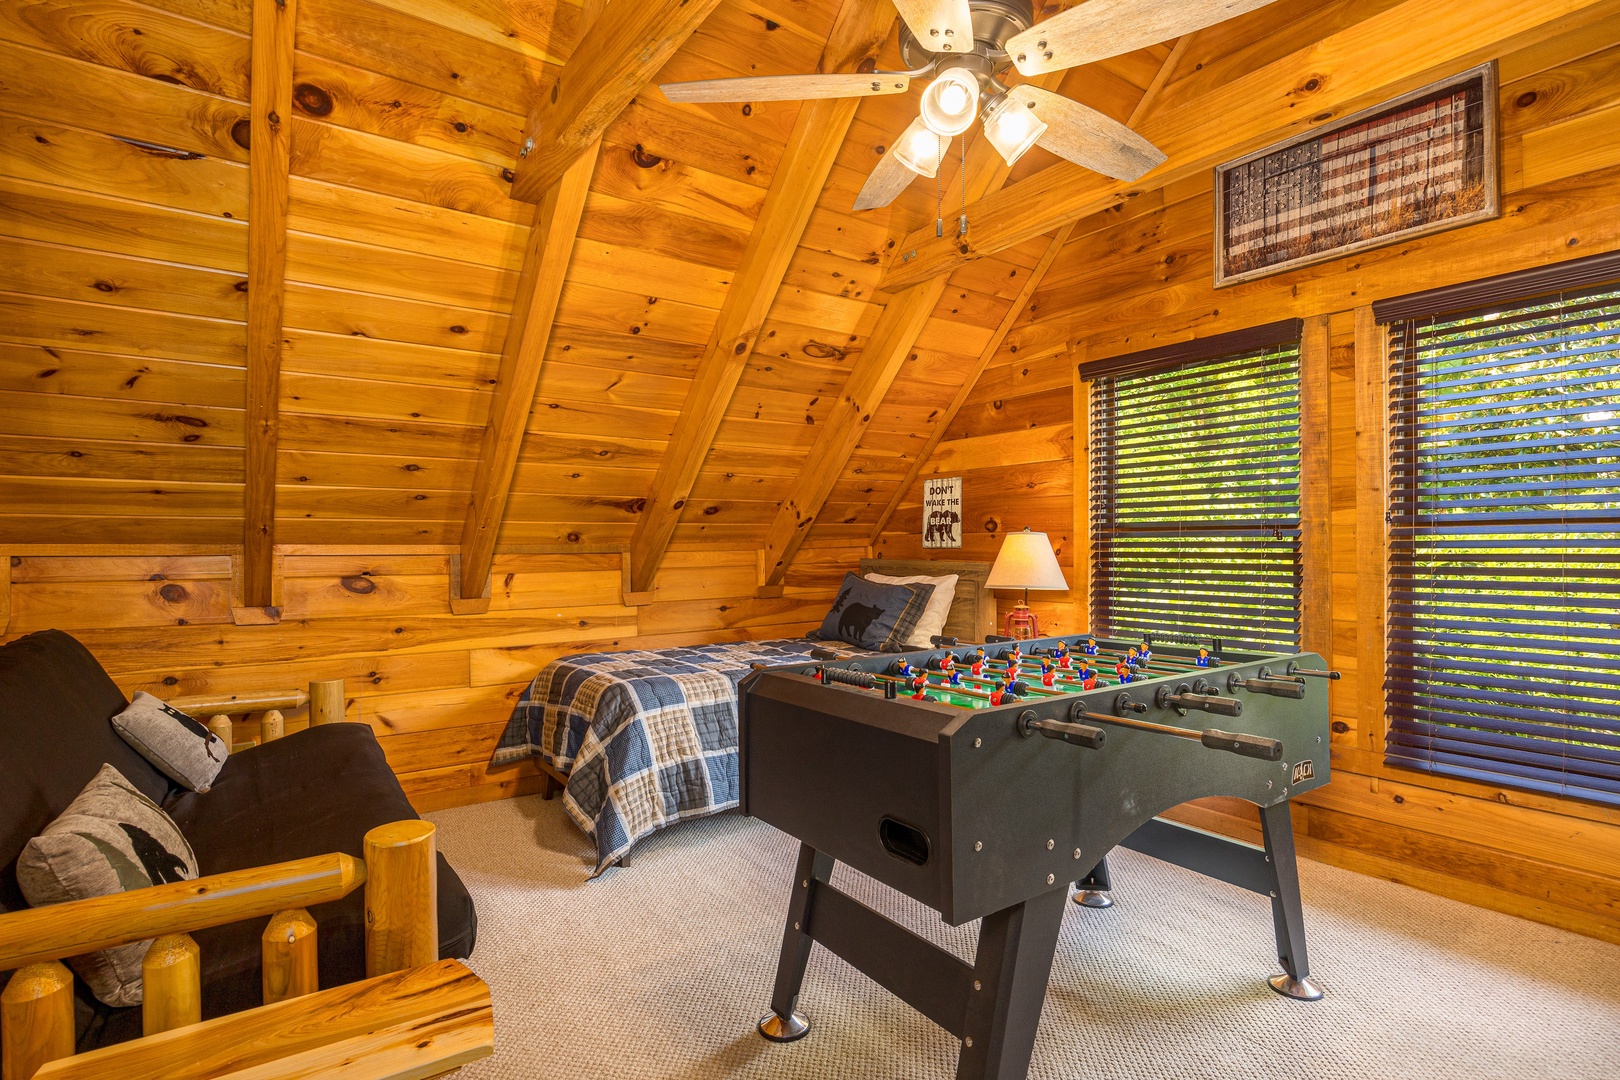 Foosball, futon, and twin bed in loft at Bear Feet Retreat, a 1 bedroom cabin rental located in pigeon forge